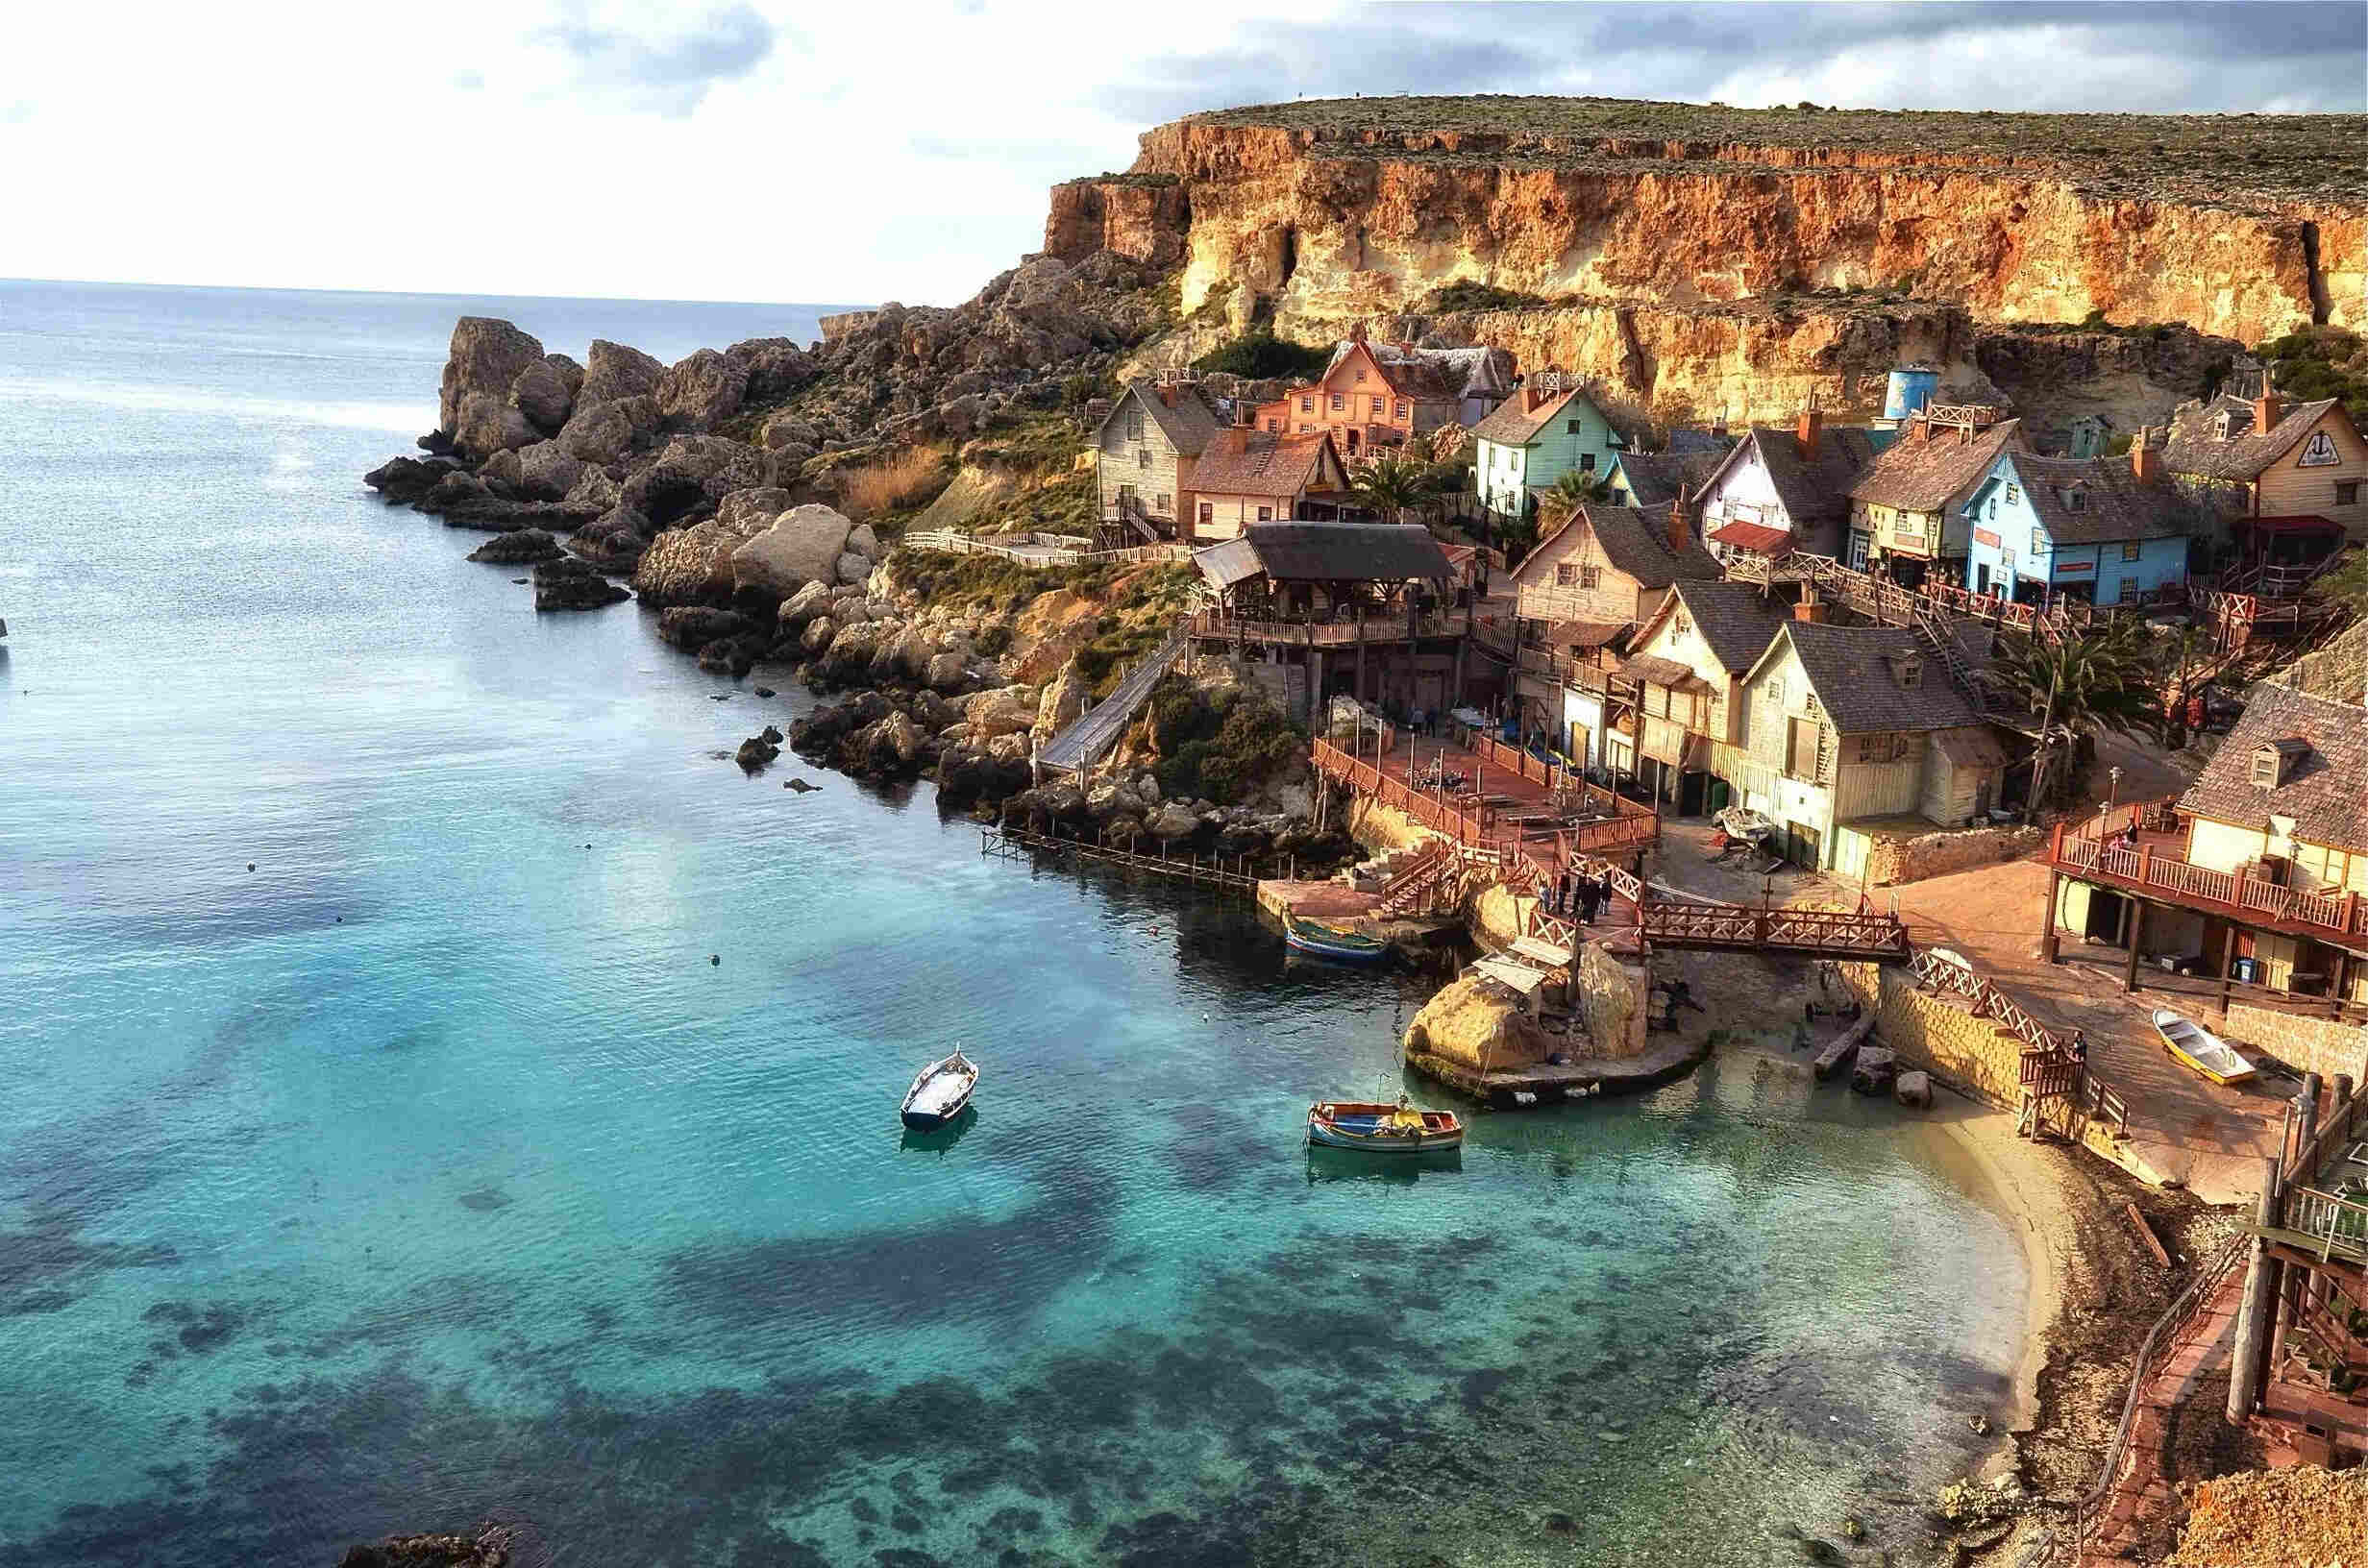 Popeye Village Viewpoint In Anchor Bay, Malta – Complete Guide